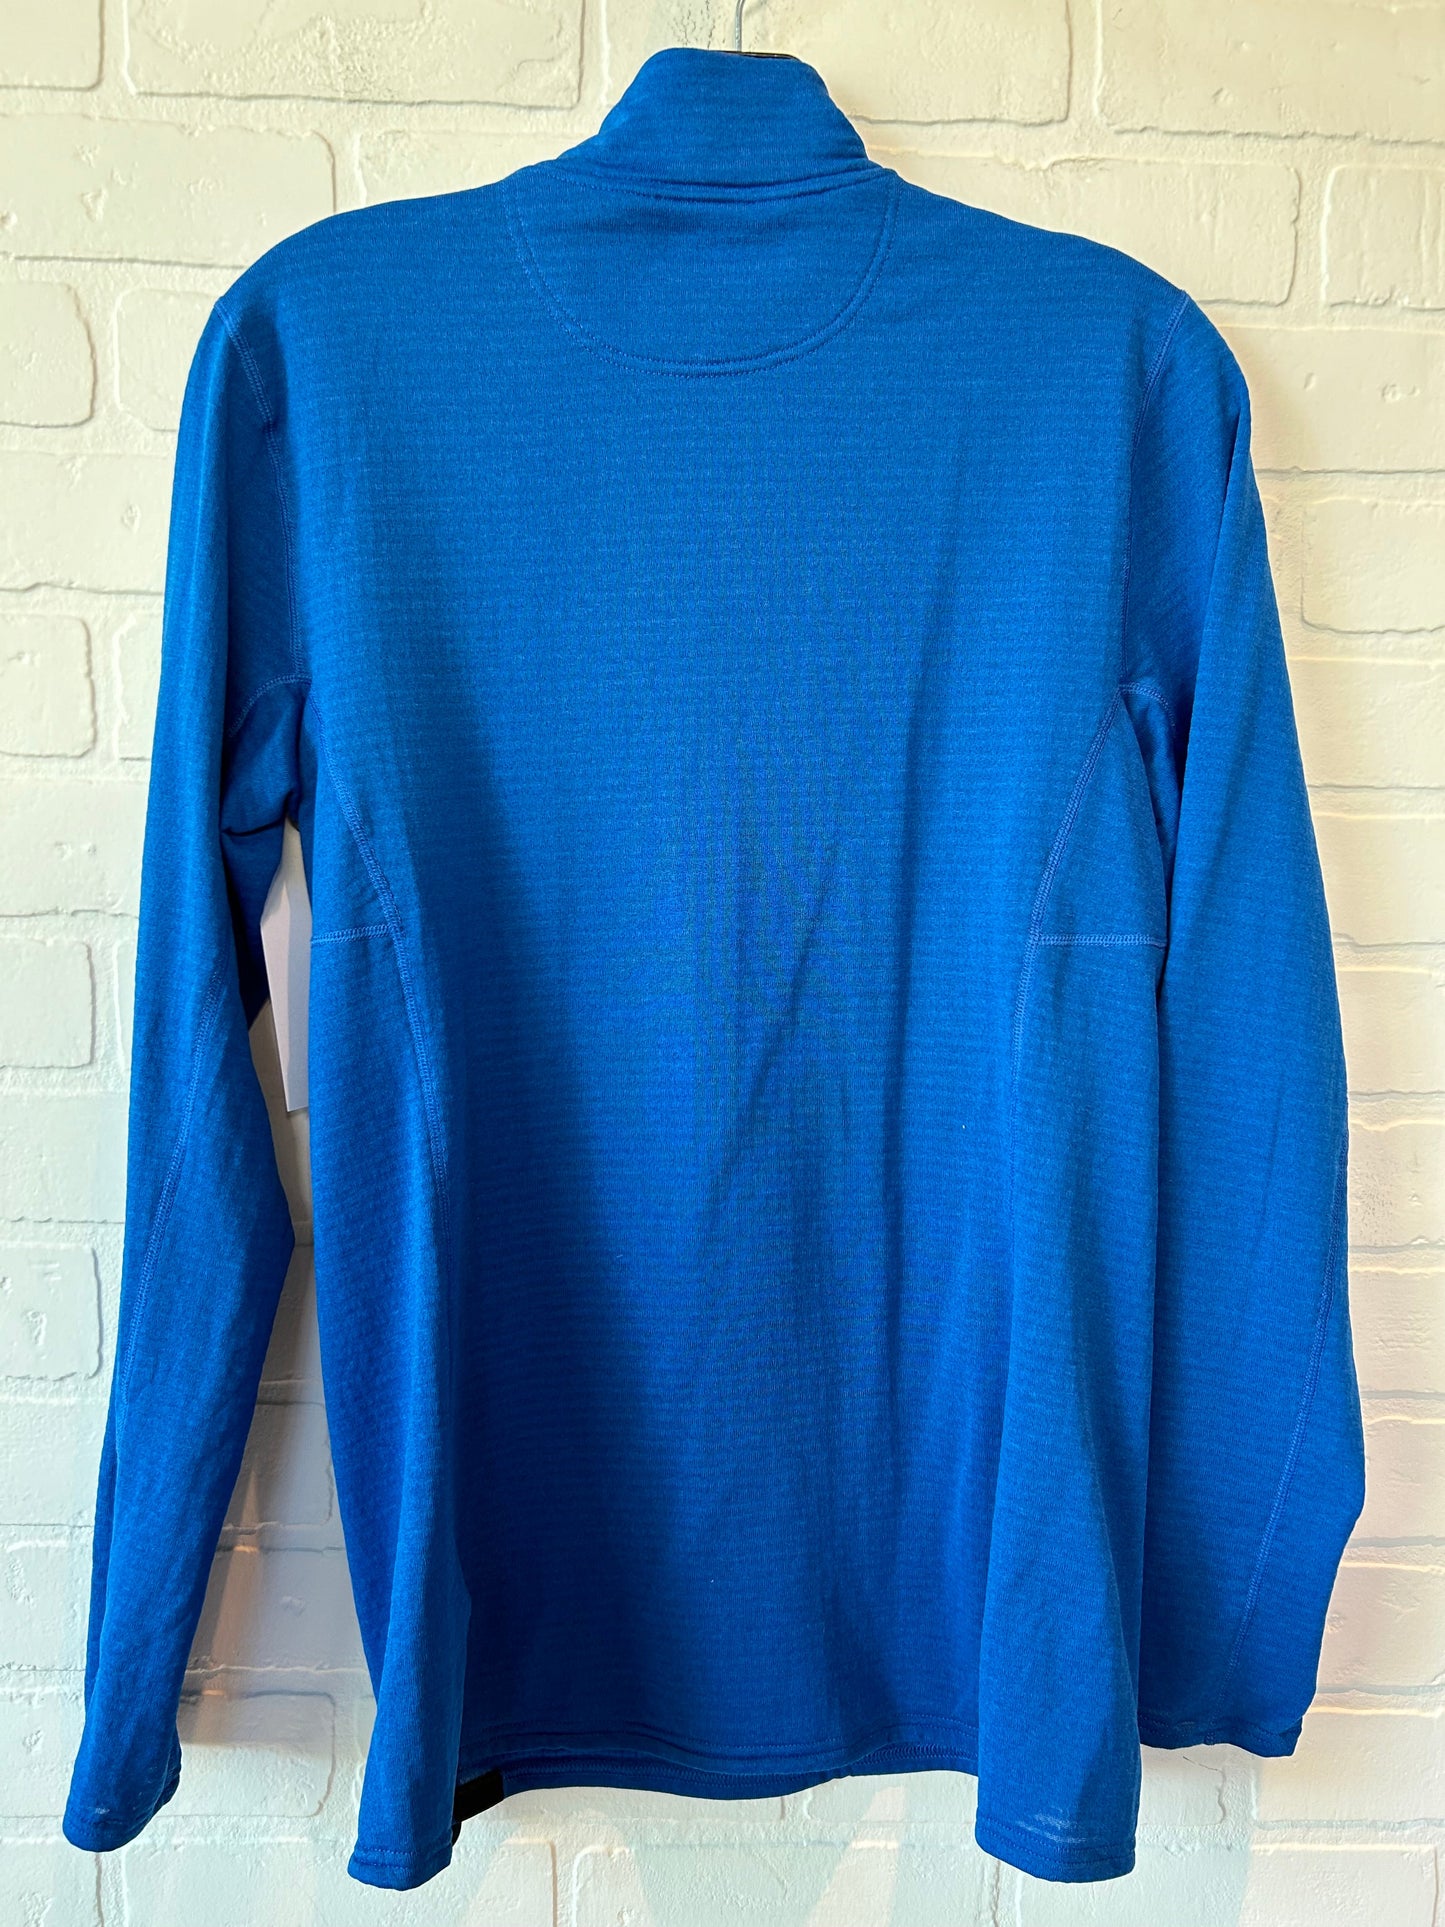 Blue Athletic Top Long Sleeve Collar Patagonia, Size M